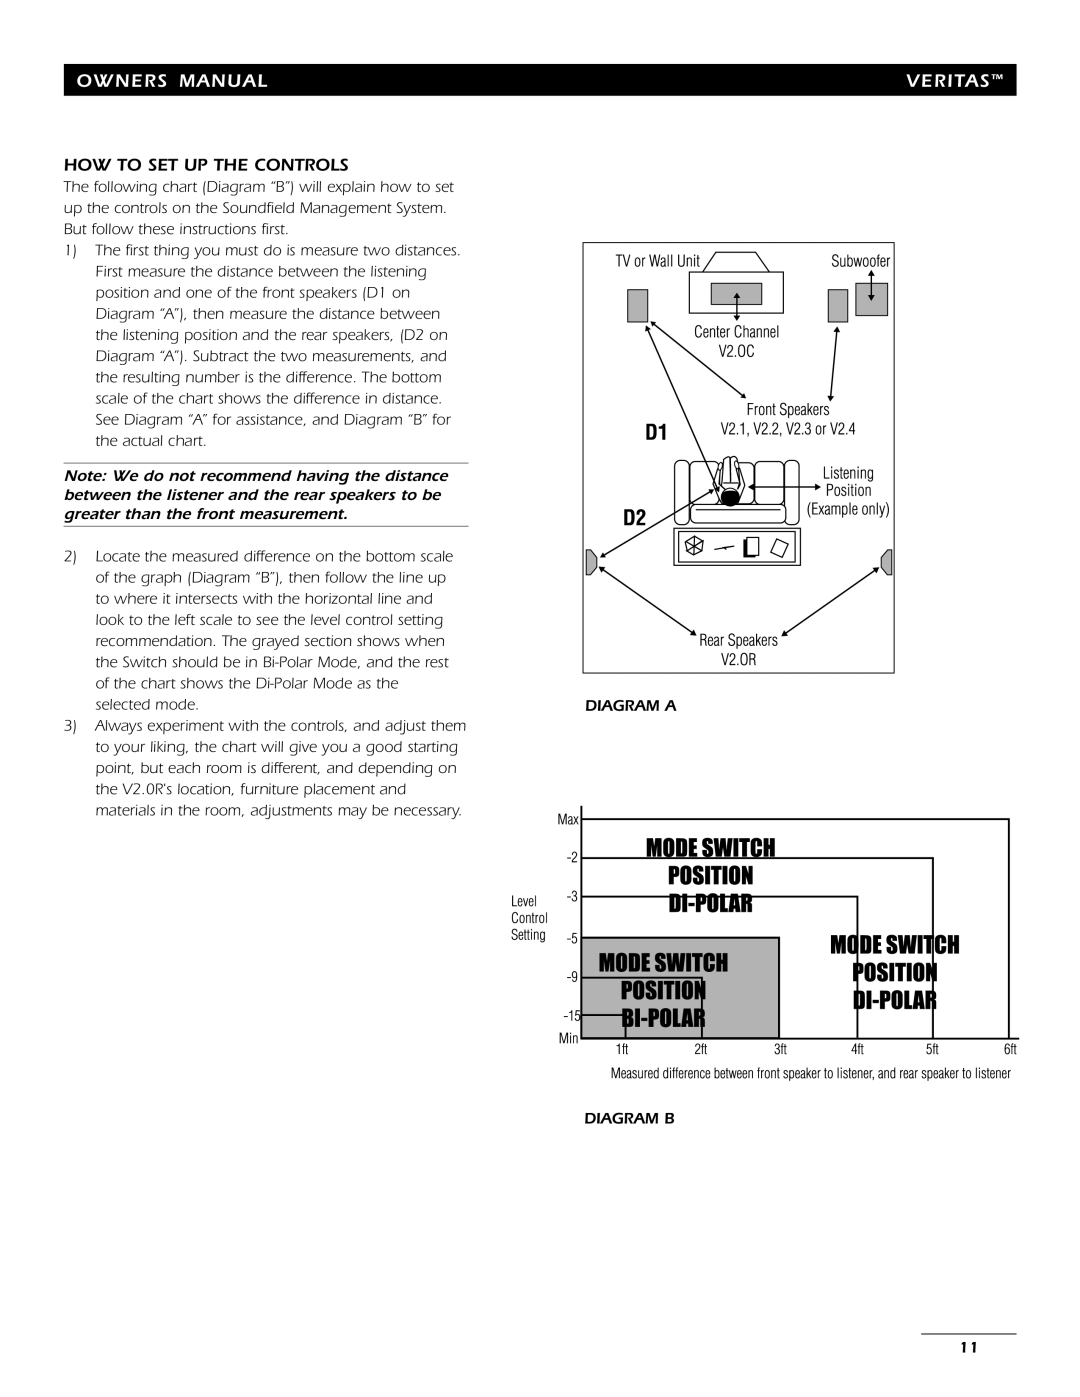 Energy Speaker Systems 7AI manual How To Set Up The Controls, Veritas 